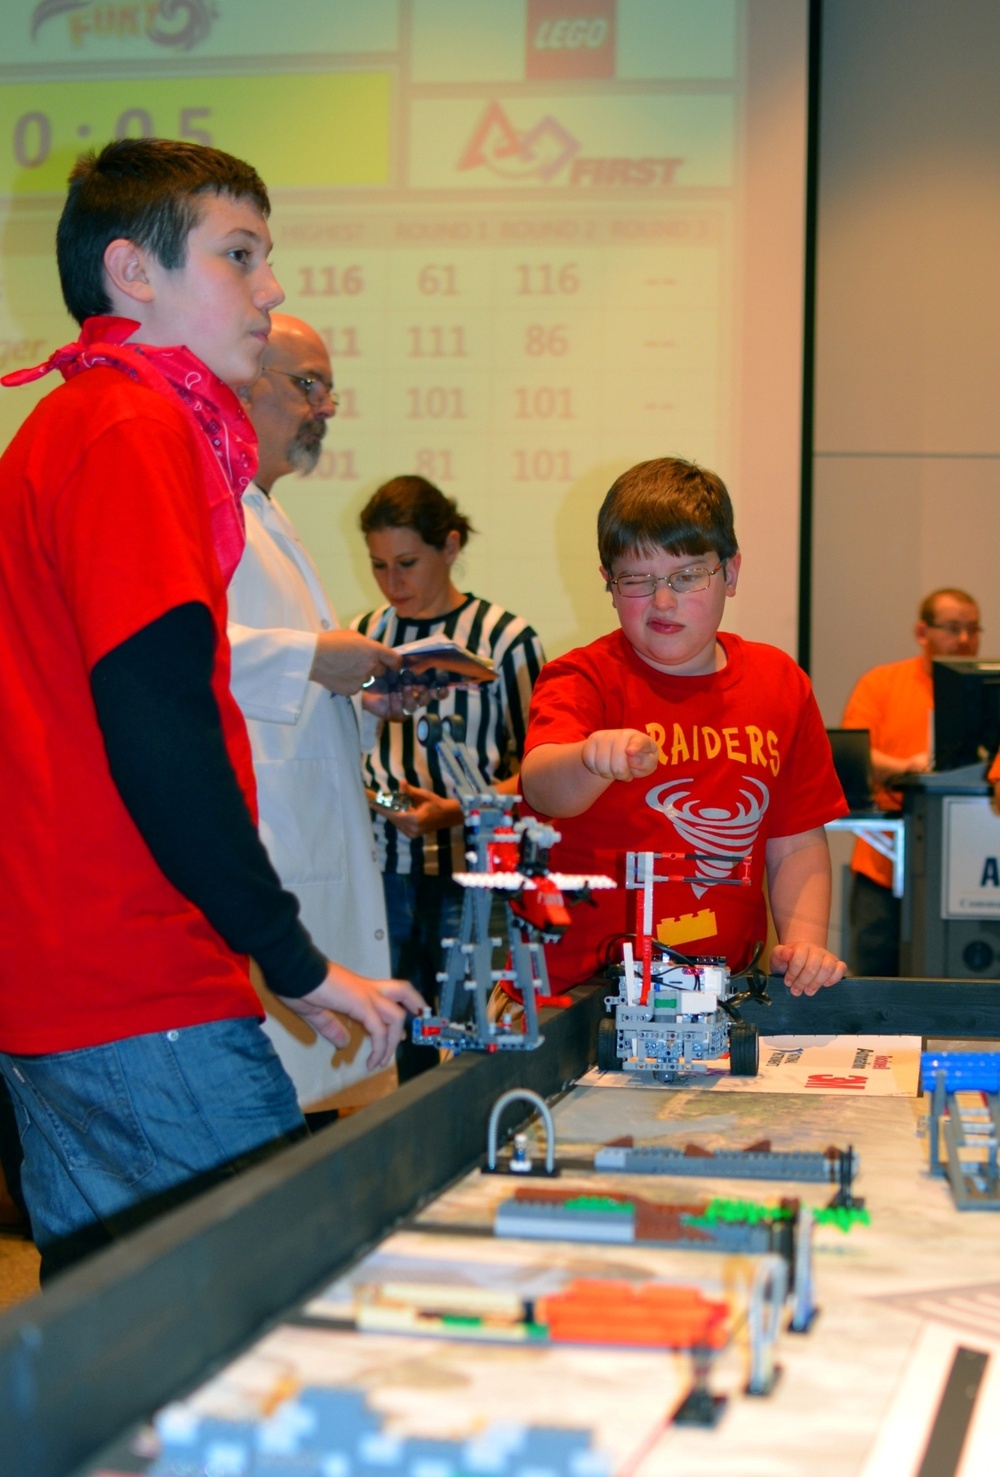 USACE inspires next generation of STEM professionals through participation in FIRST Lego League